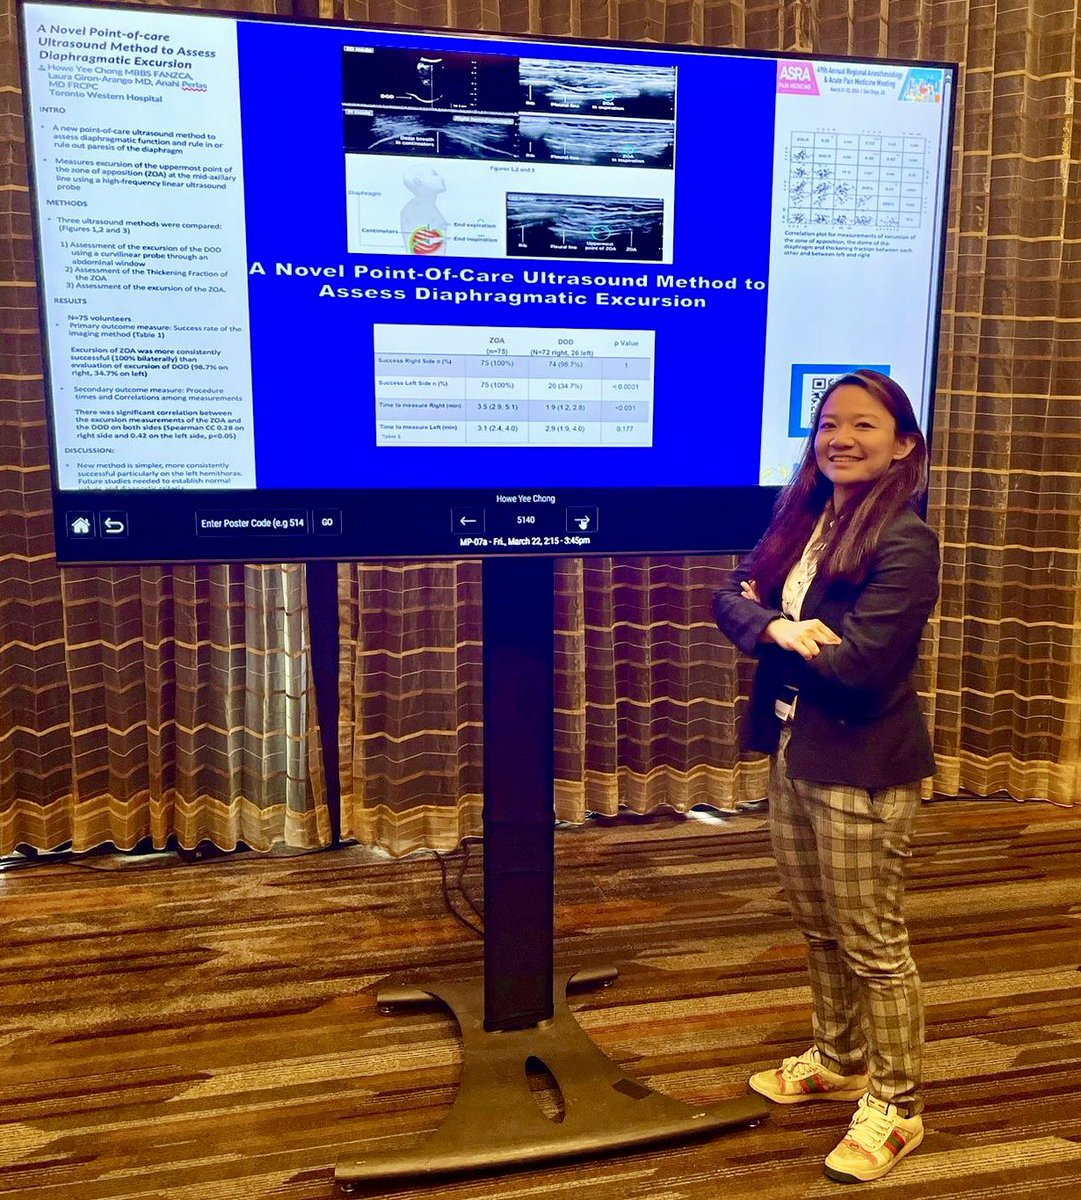 Proud to see the next generation of TWH fellows continuing a great tradition of research - @michyaries888 presenting not just one but two posters on ACB catheters & lung US at #ASRASPRING24 @PerlasAnahi (On top of her day job as Spotify music artist - echolily 🤩)